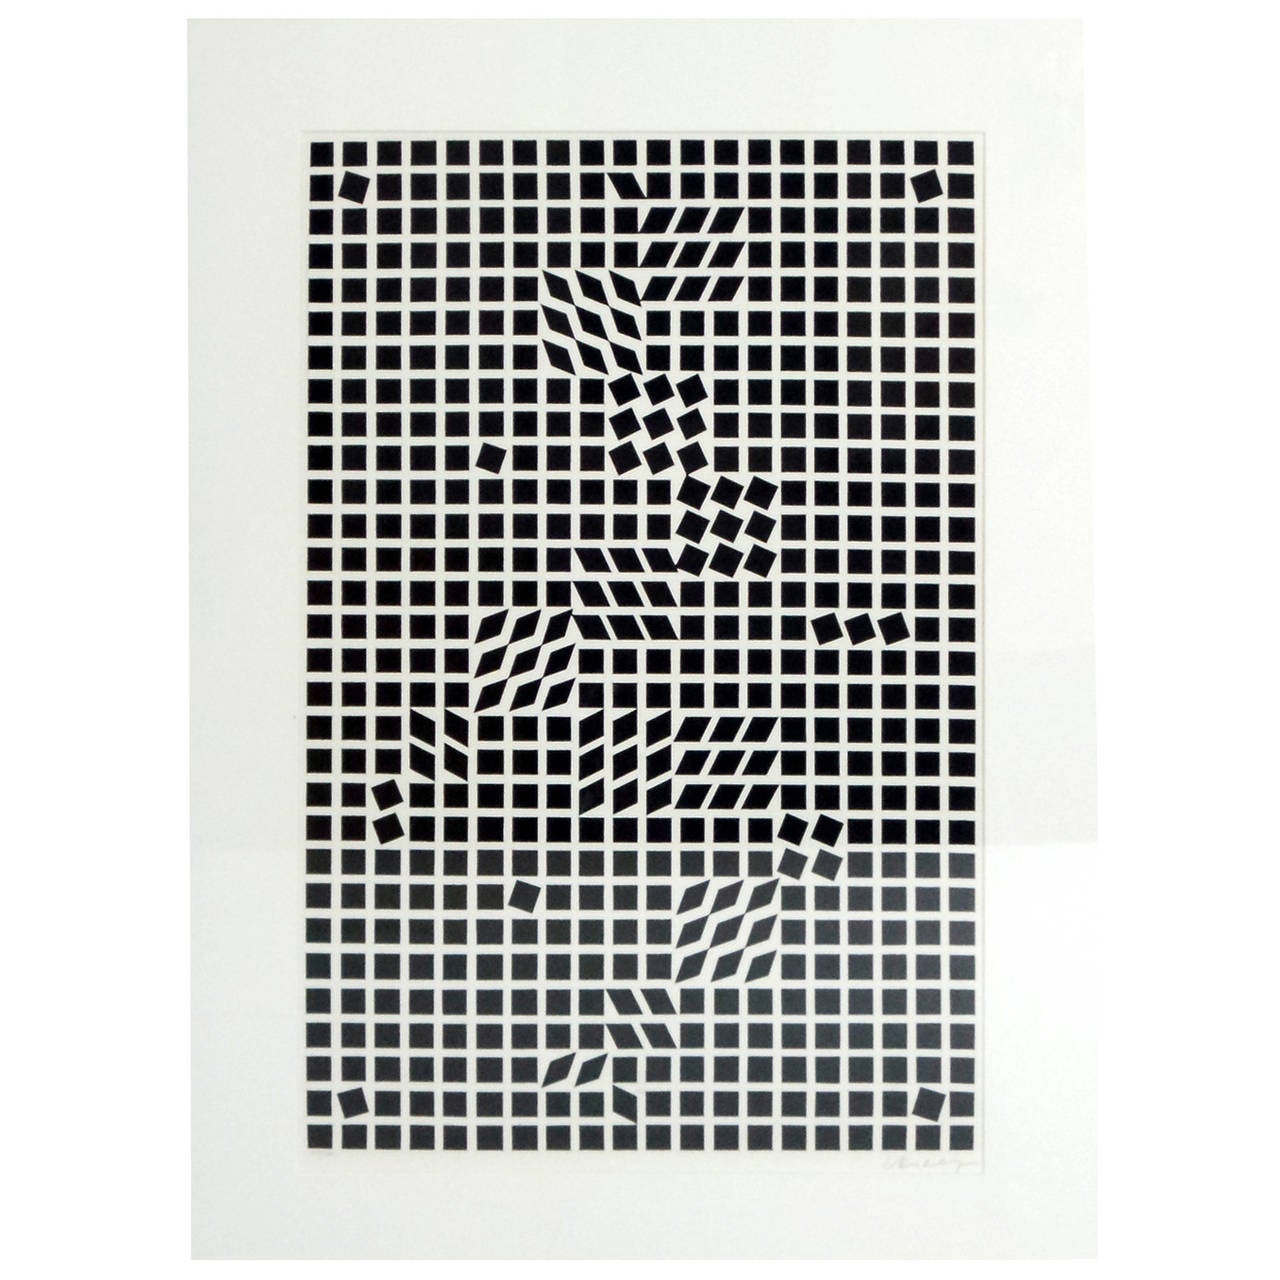 "Illusion Optica" by Victor Vasarely For Sale